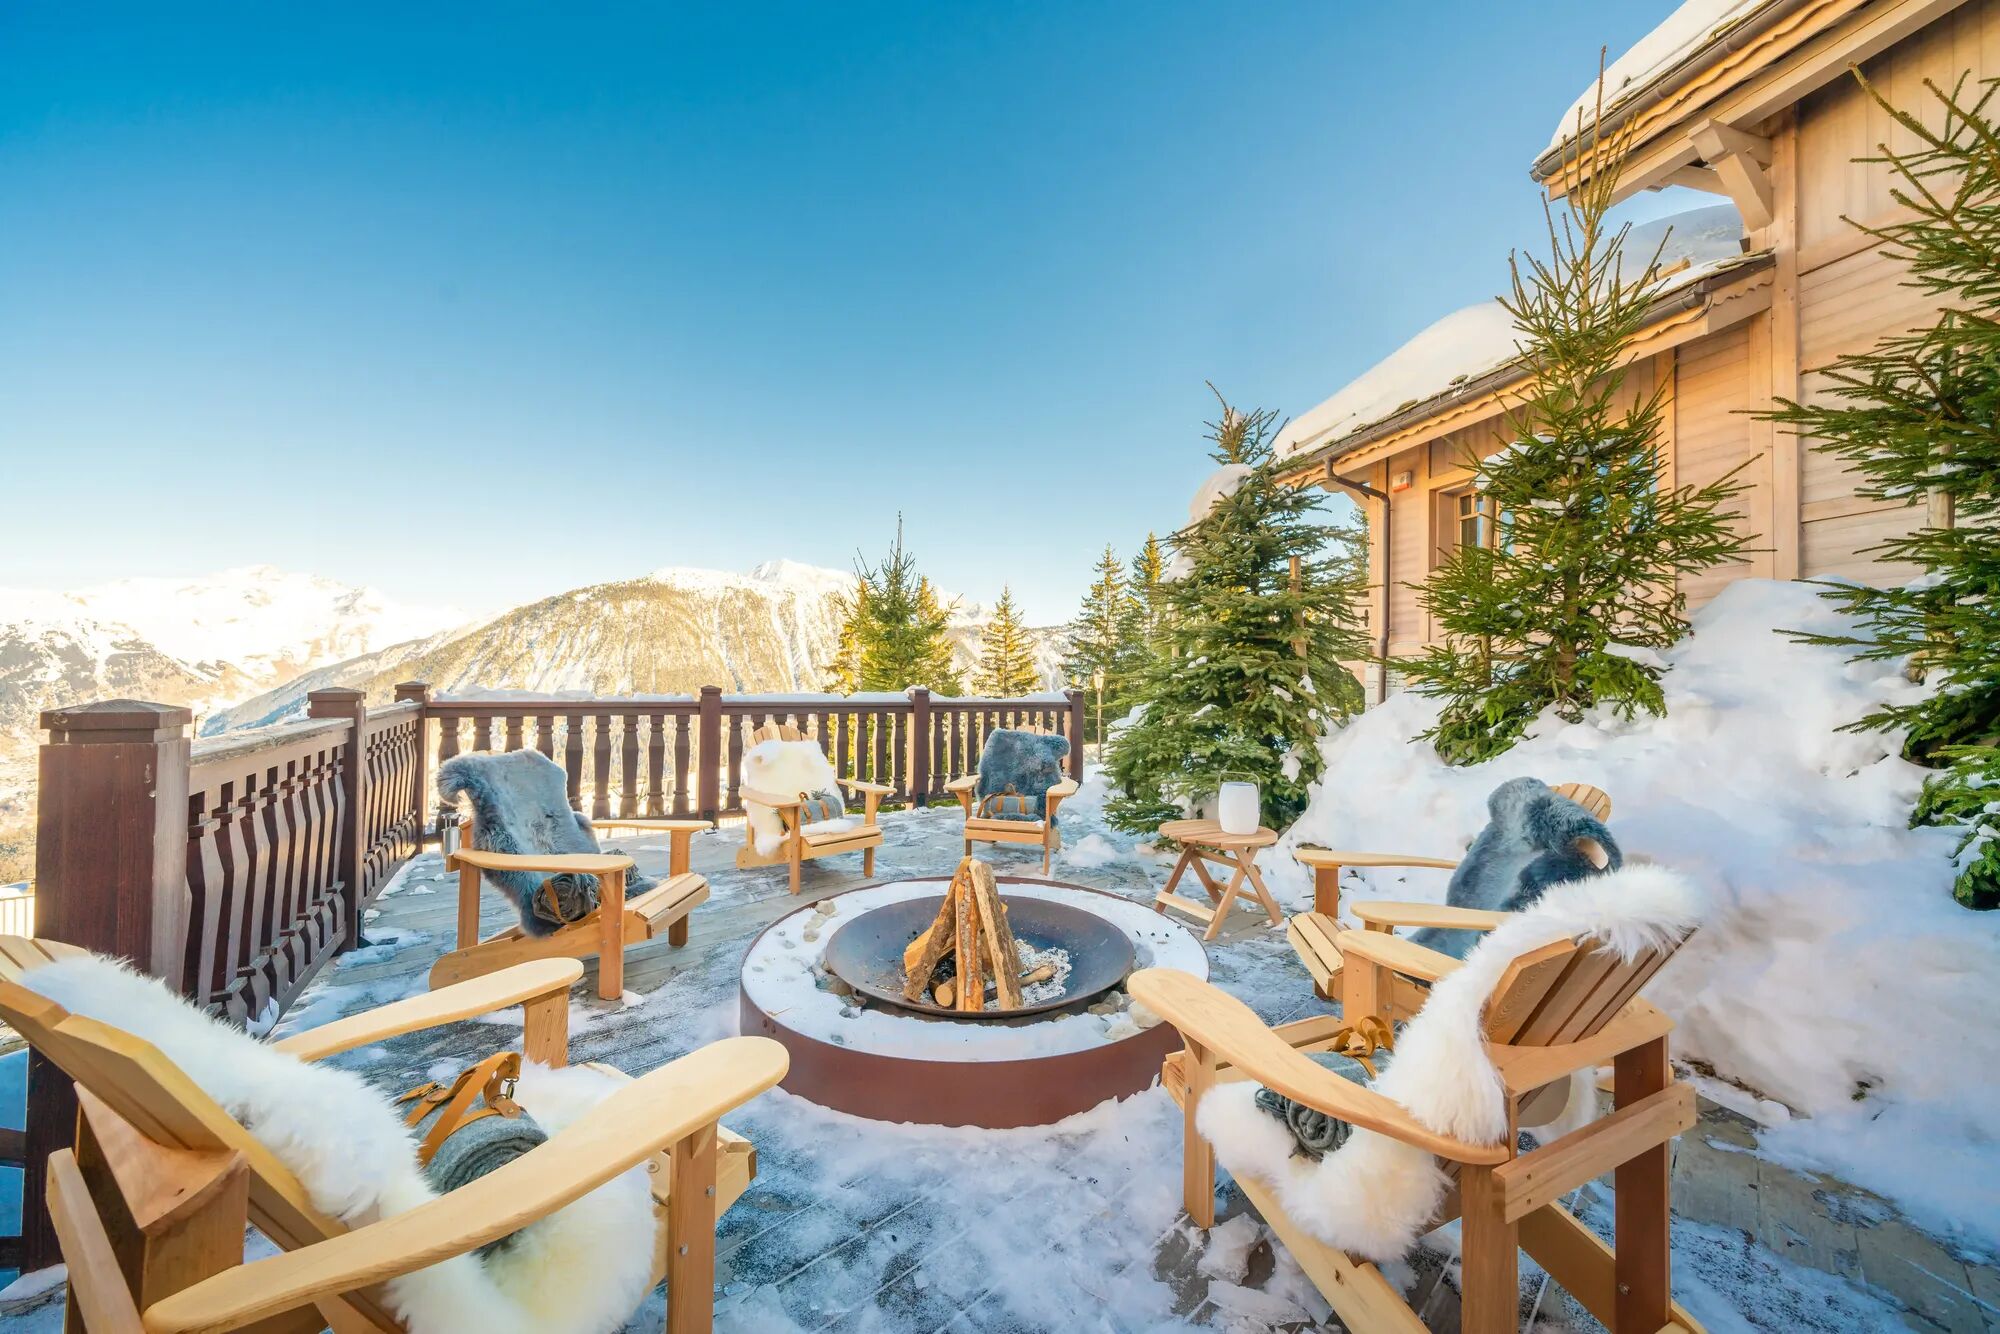 Exterior of luxury chalet rental with a beautiful firepit and chairs surrounding the snowy landscape.